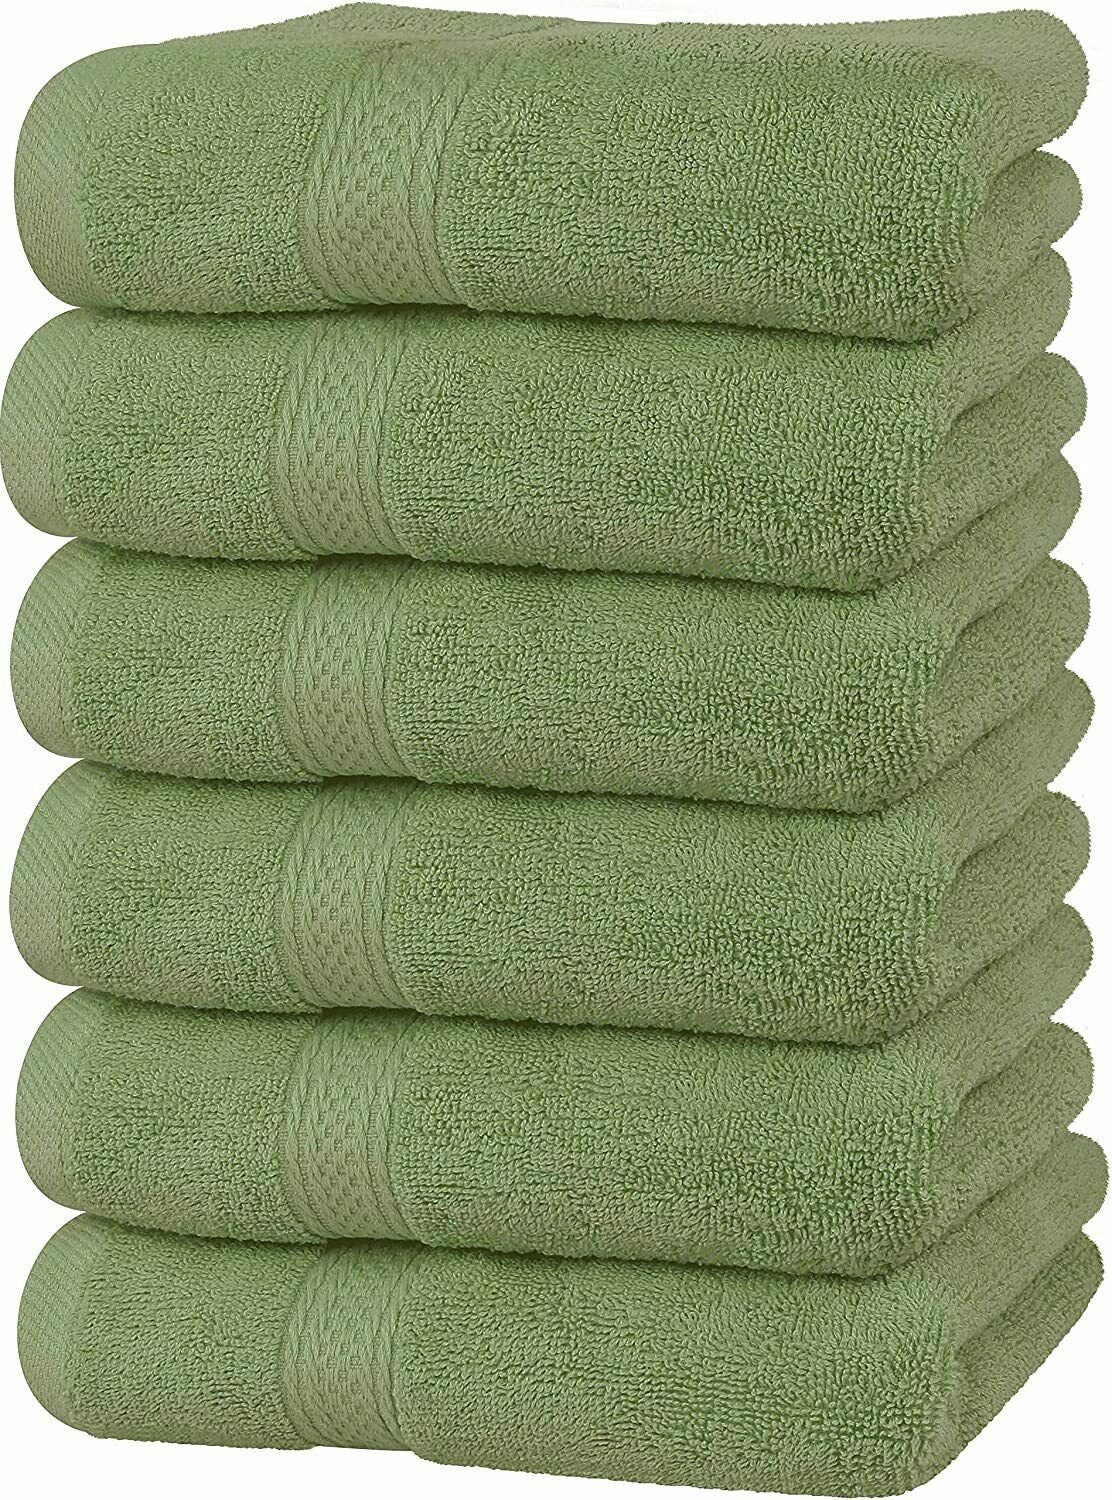 AQUA Pack of 6 Large Bath Towels 100% Cotton 27x55 Highly Absorbent Soft